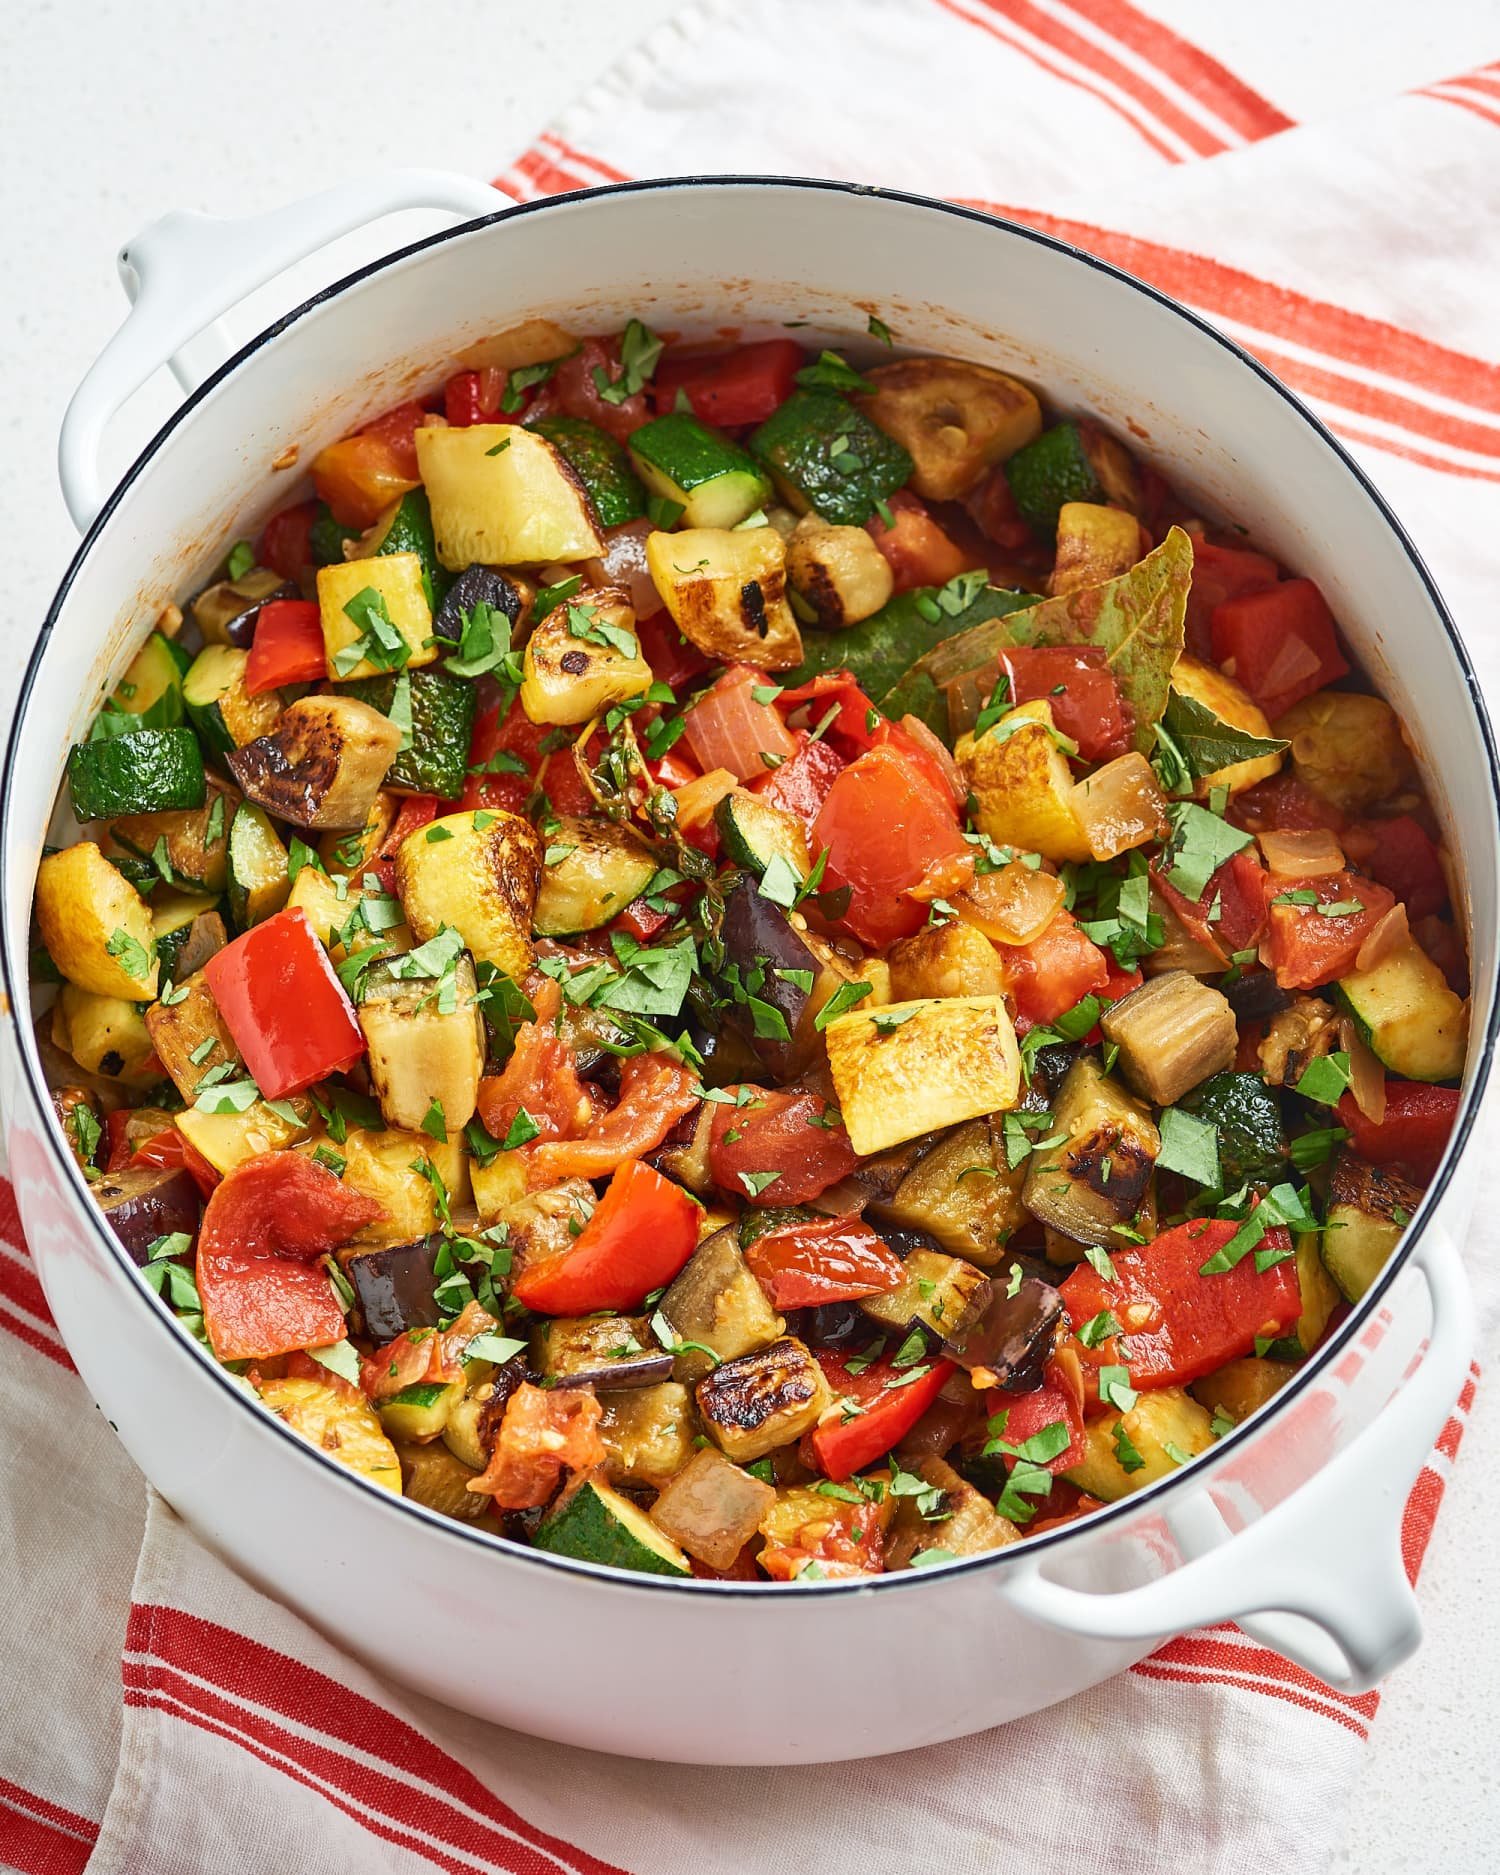 Easy French Ratatouille Is the Best Way to Eat Vegetables